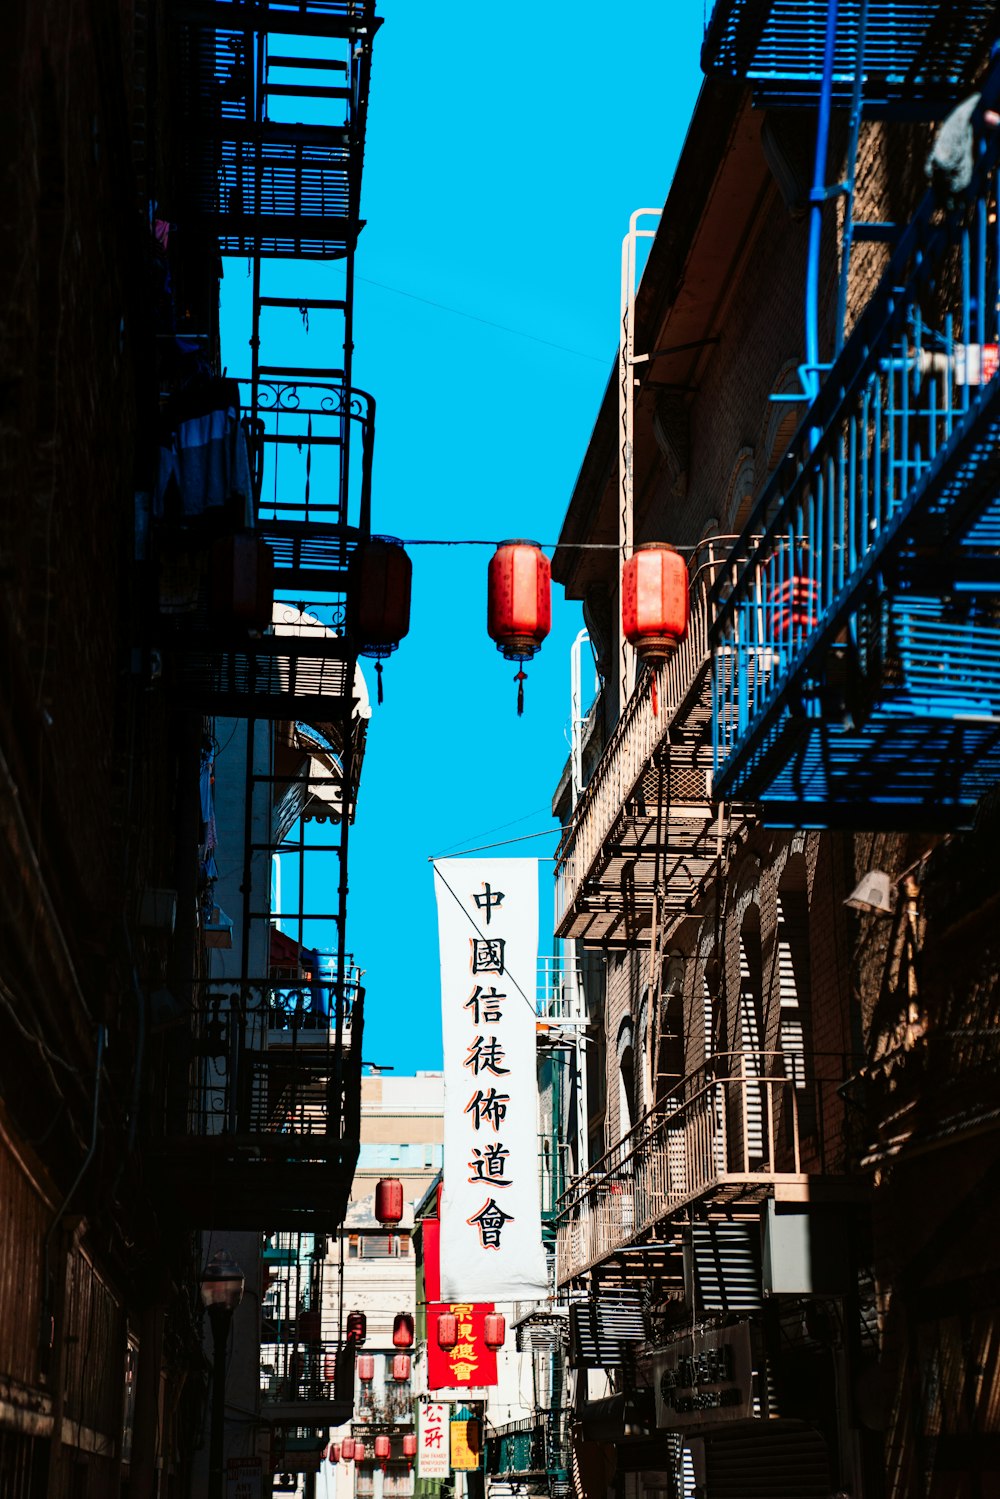 Kanji script signs hanged on buildings during daytime